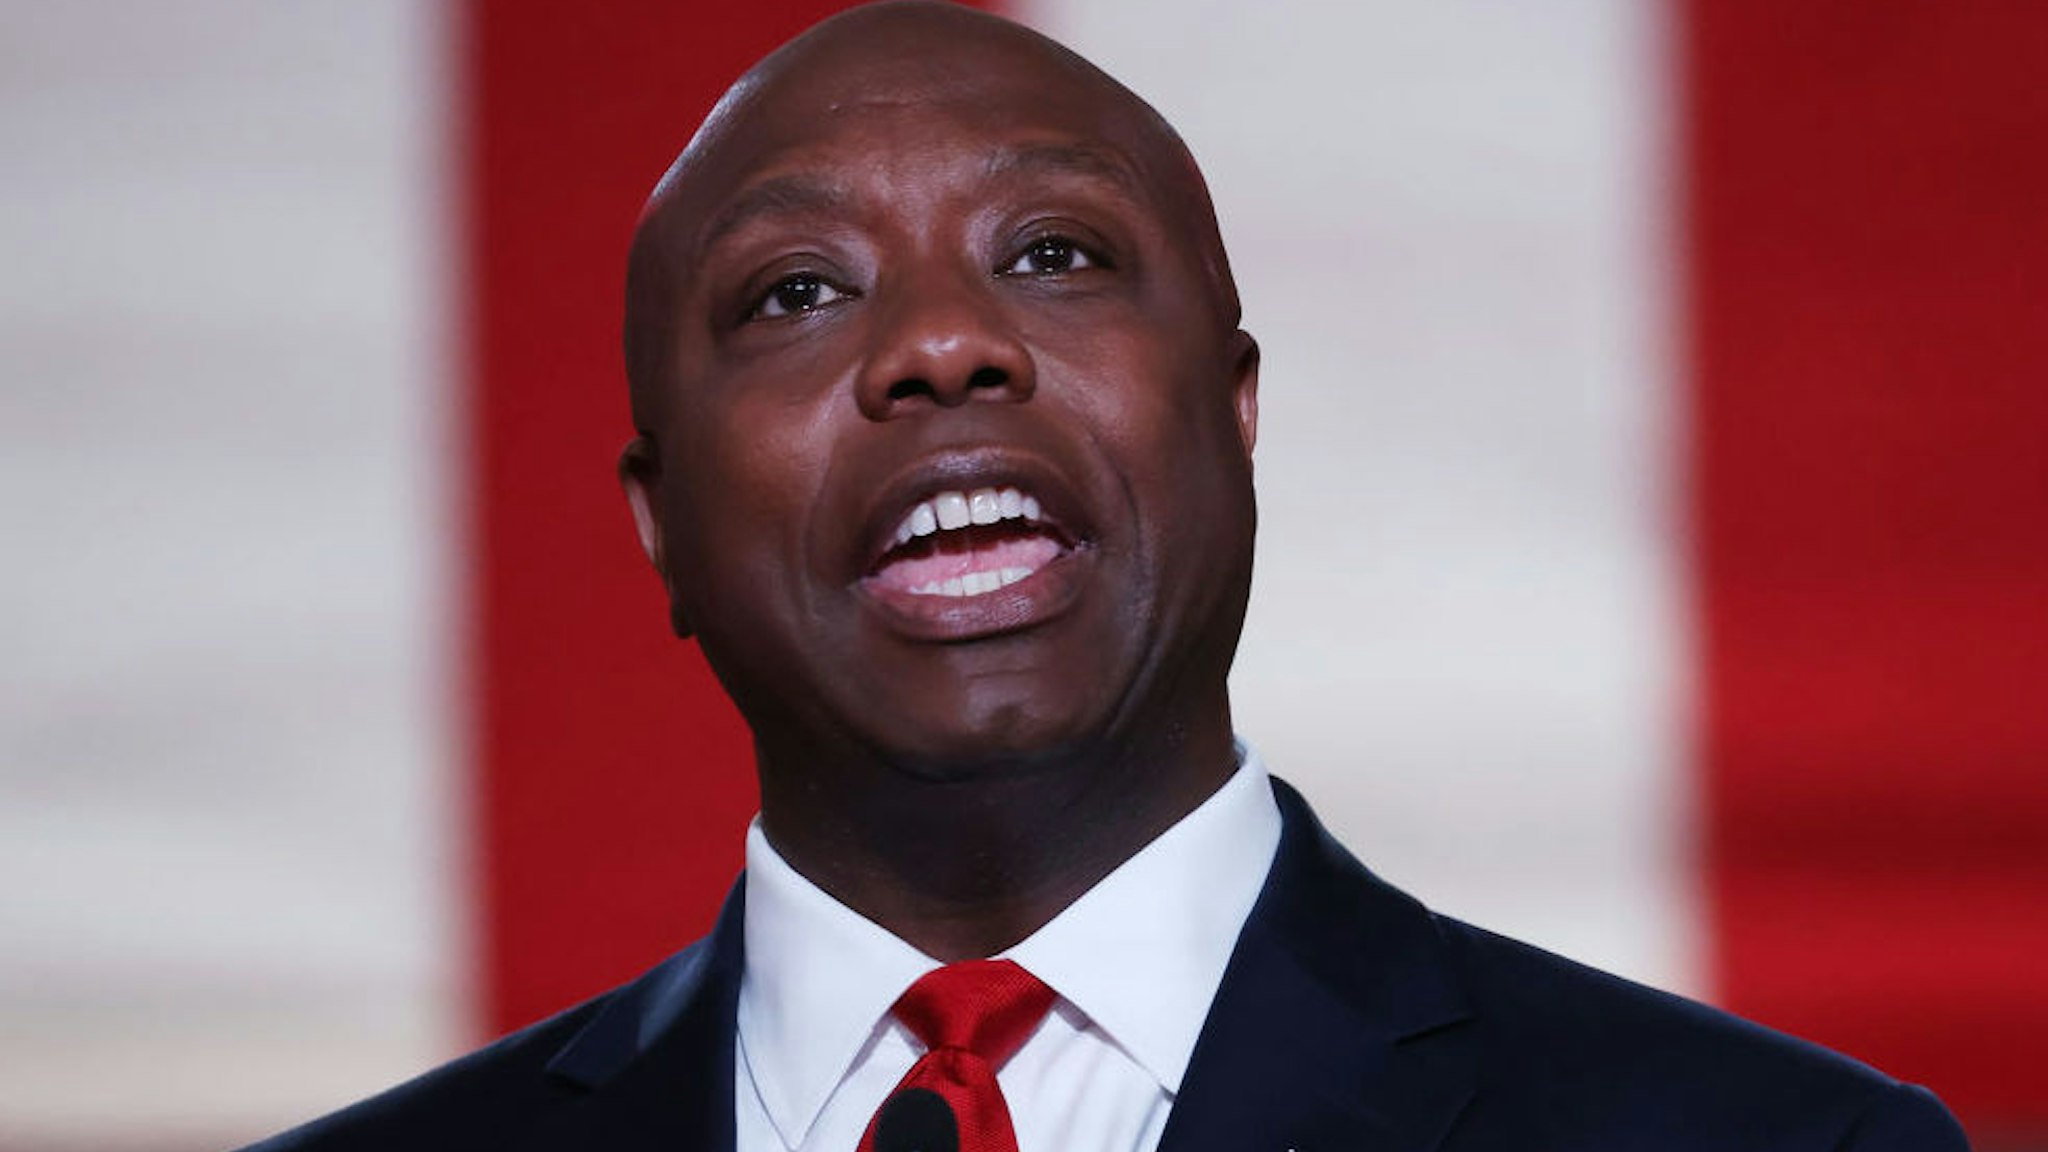 U.S. Sen. Tim Scott (R-SC) stands on stage in an empty Mellon Auditorium while addressing the Republican National Convention at the Mellon Auditorium on August 24, 2020 in Washington, DC.